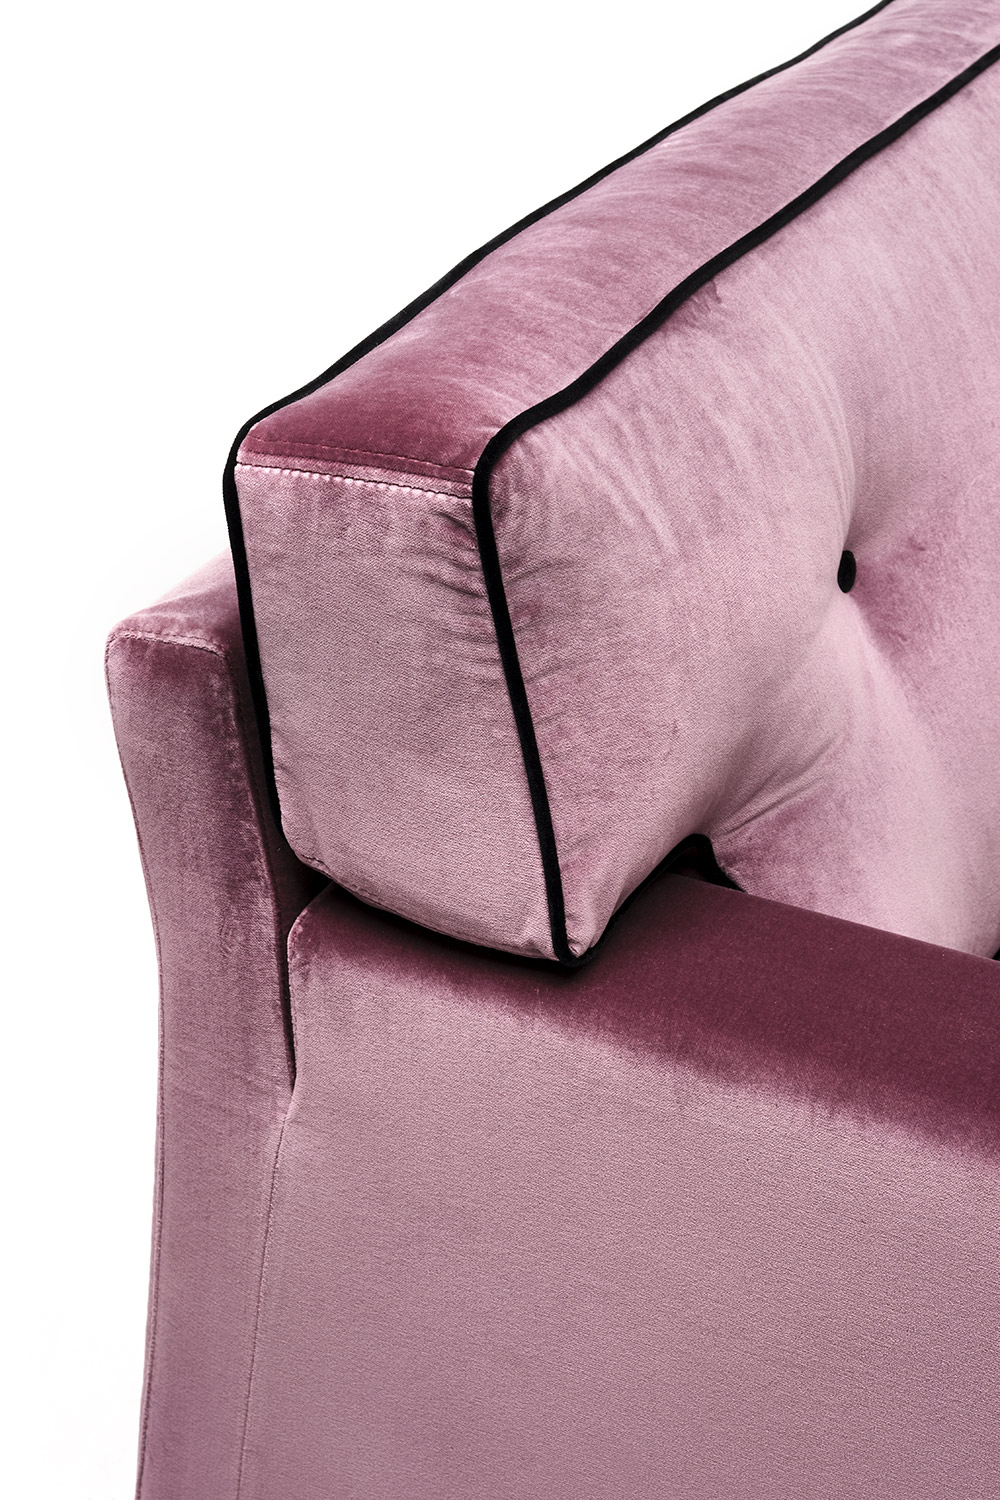 Mussi Roma sofa side detail 